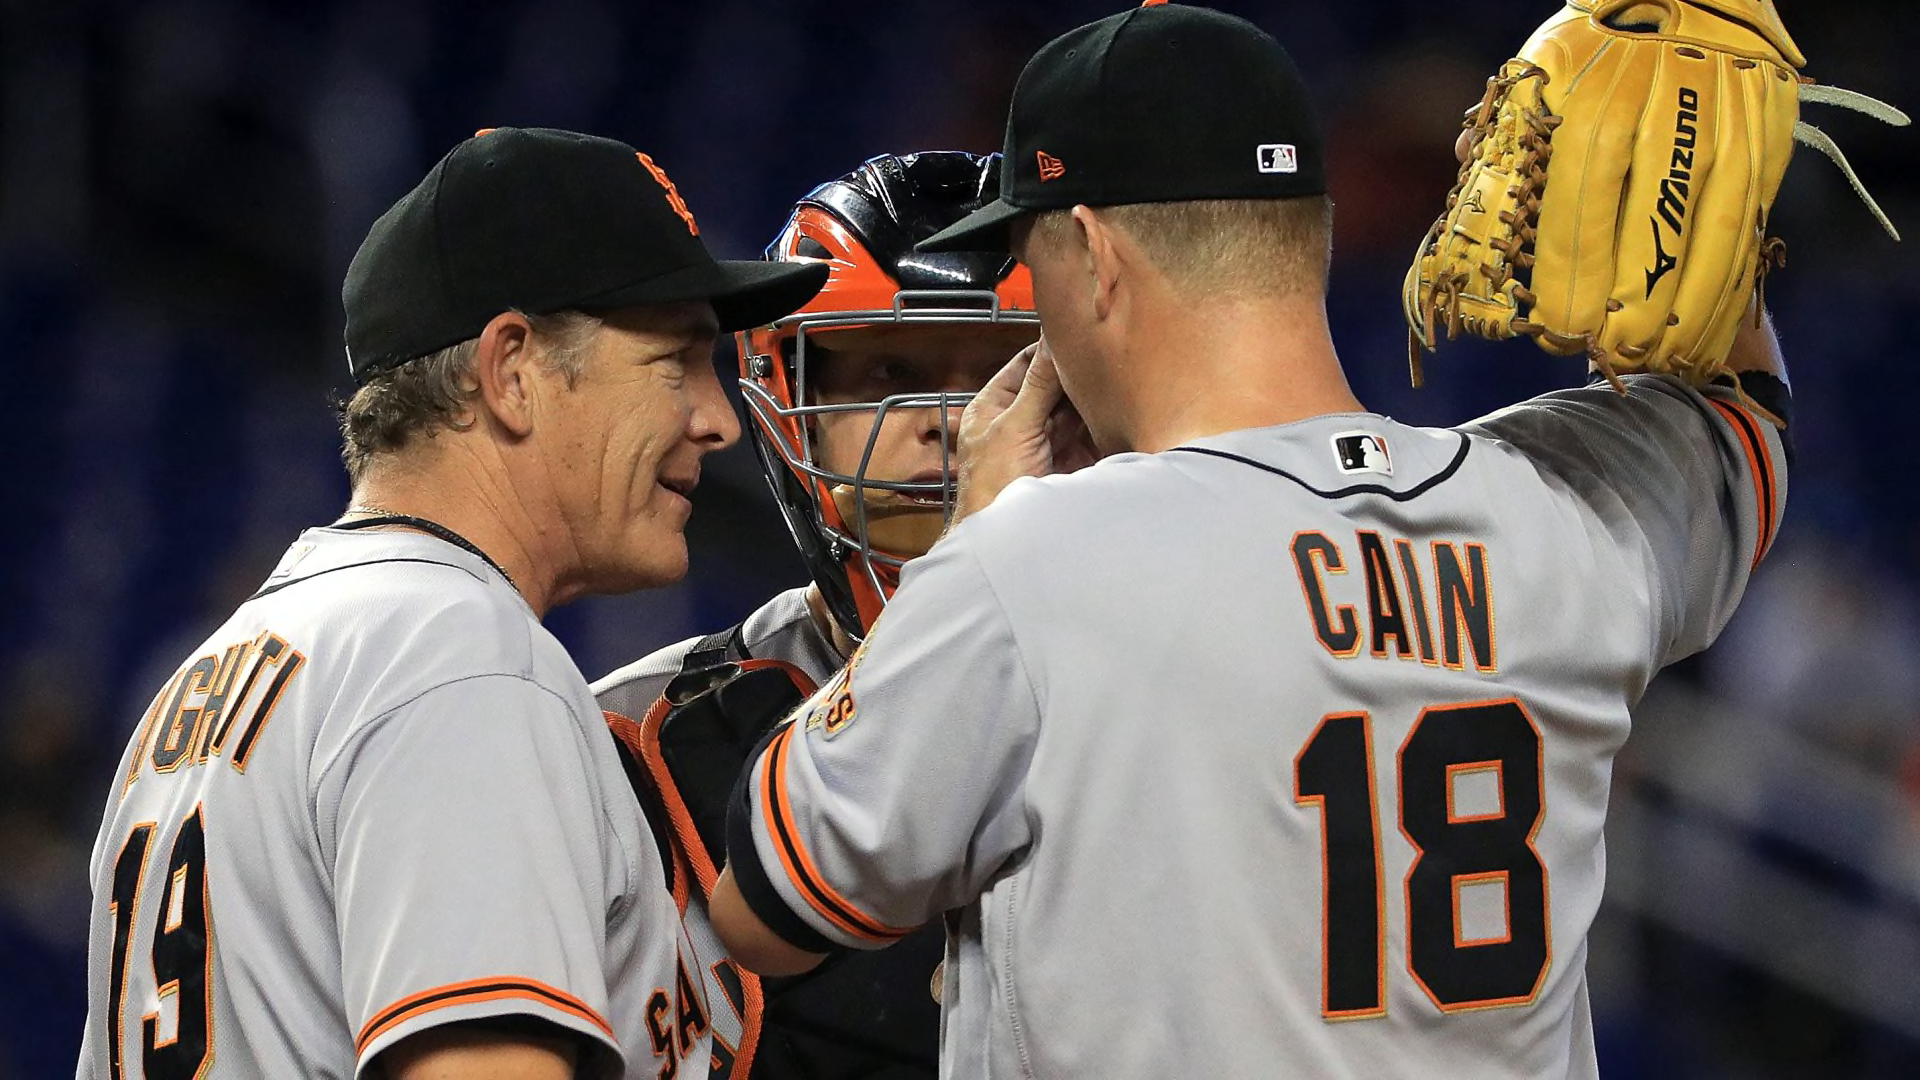 San Francisco Giants To Reassign Entire Coaching Staff